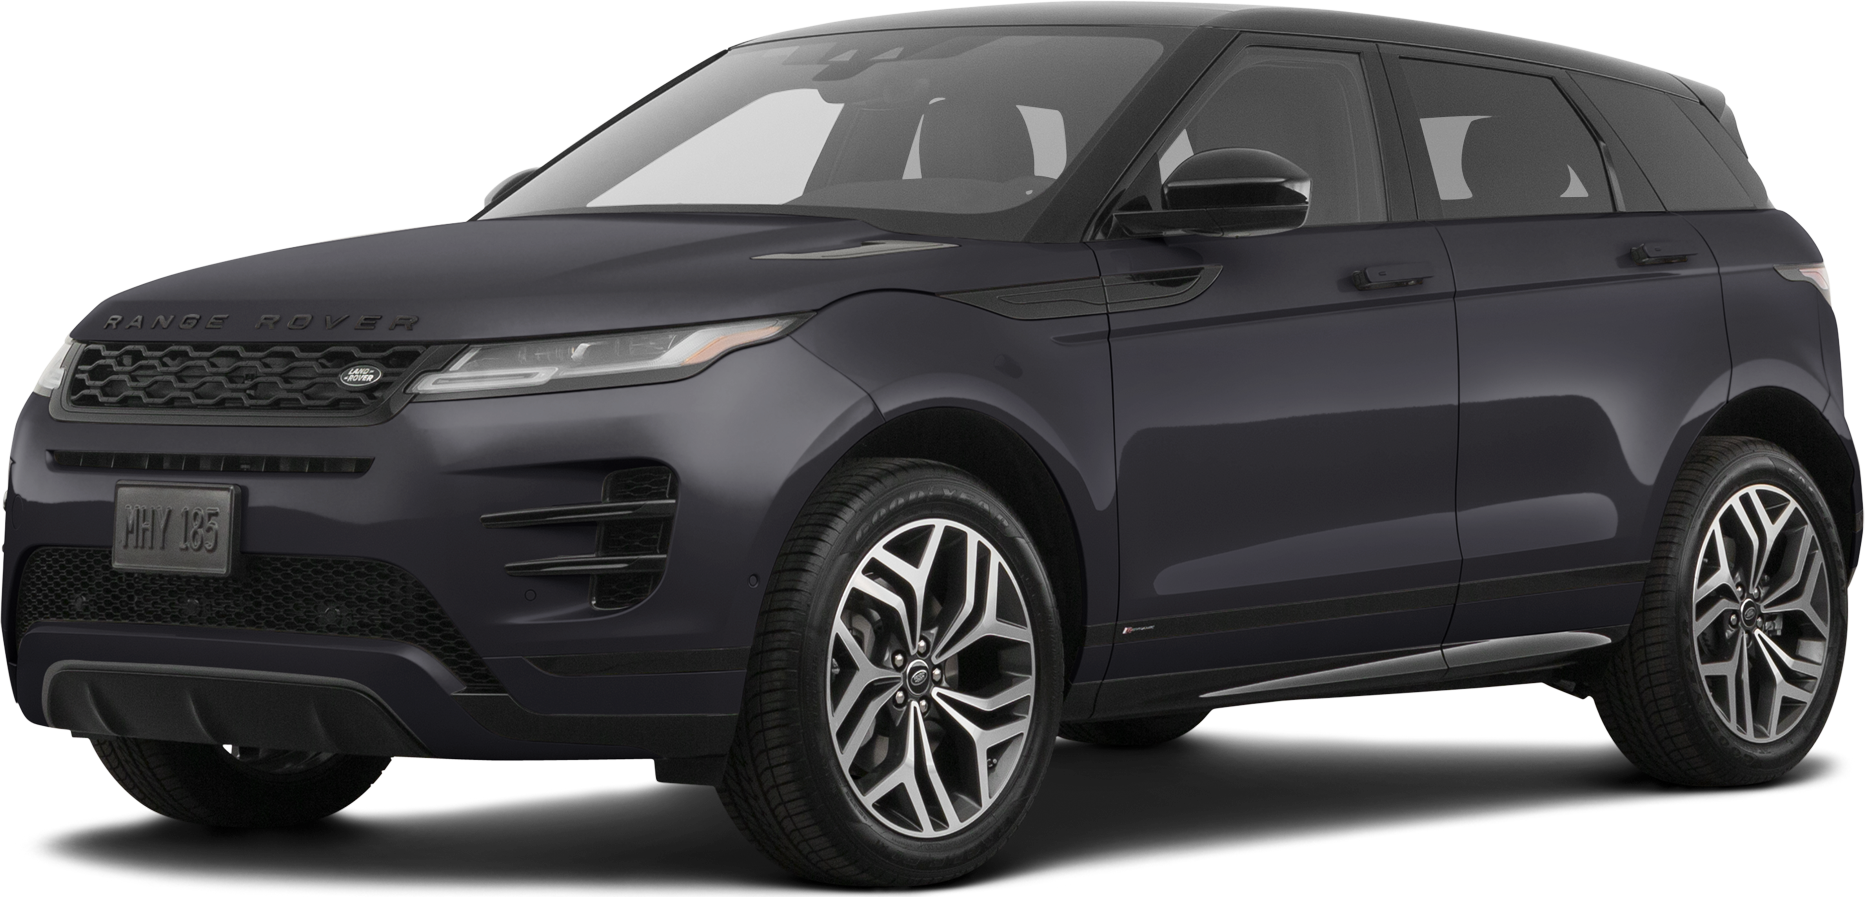 2023 Range Rover Evoque plug-in hybrid review - Drive